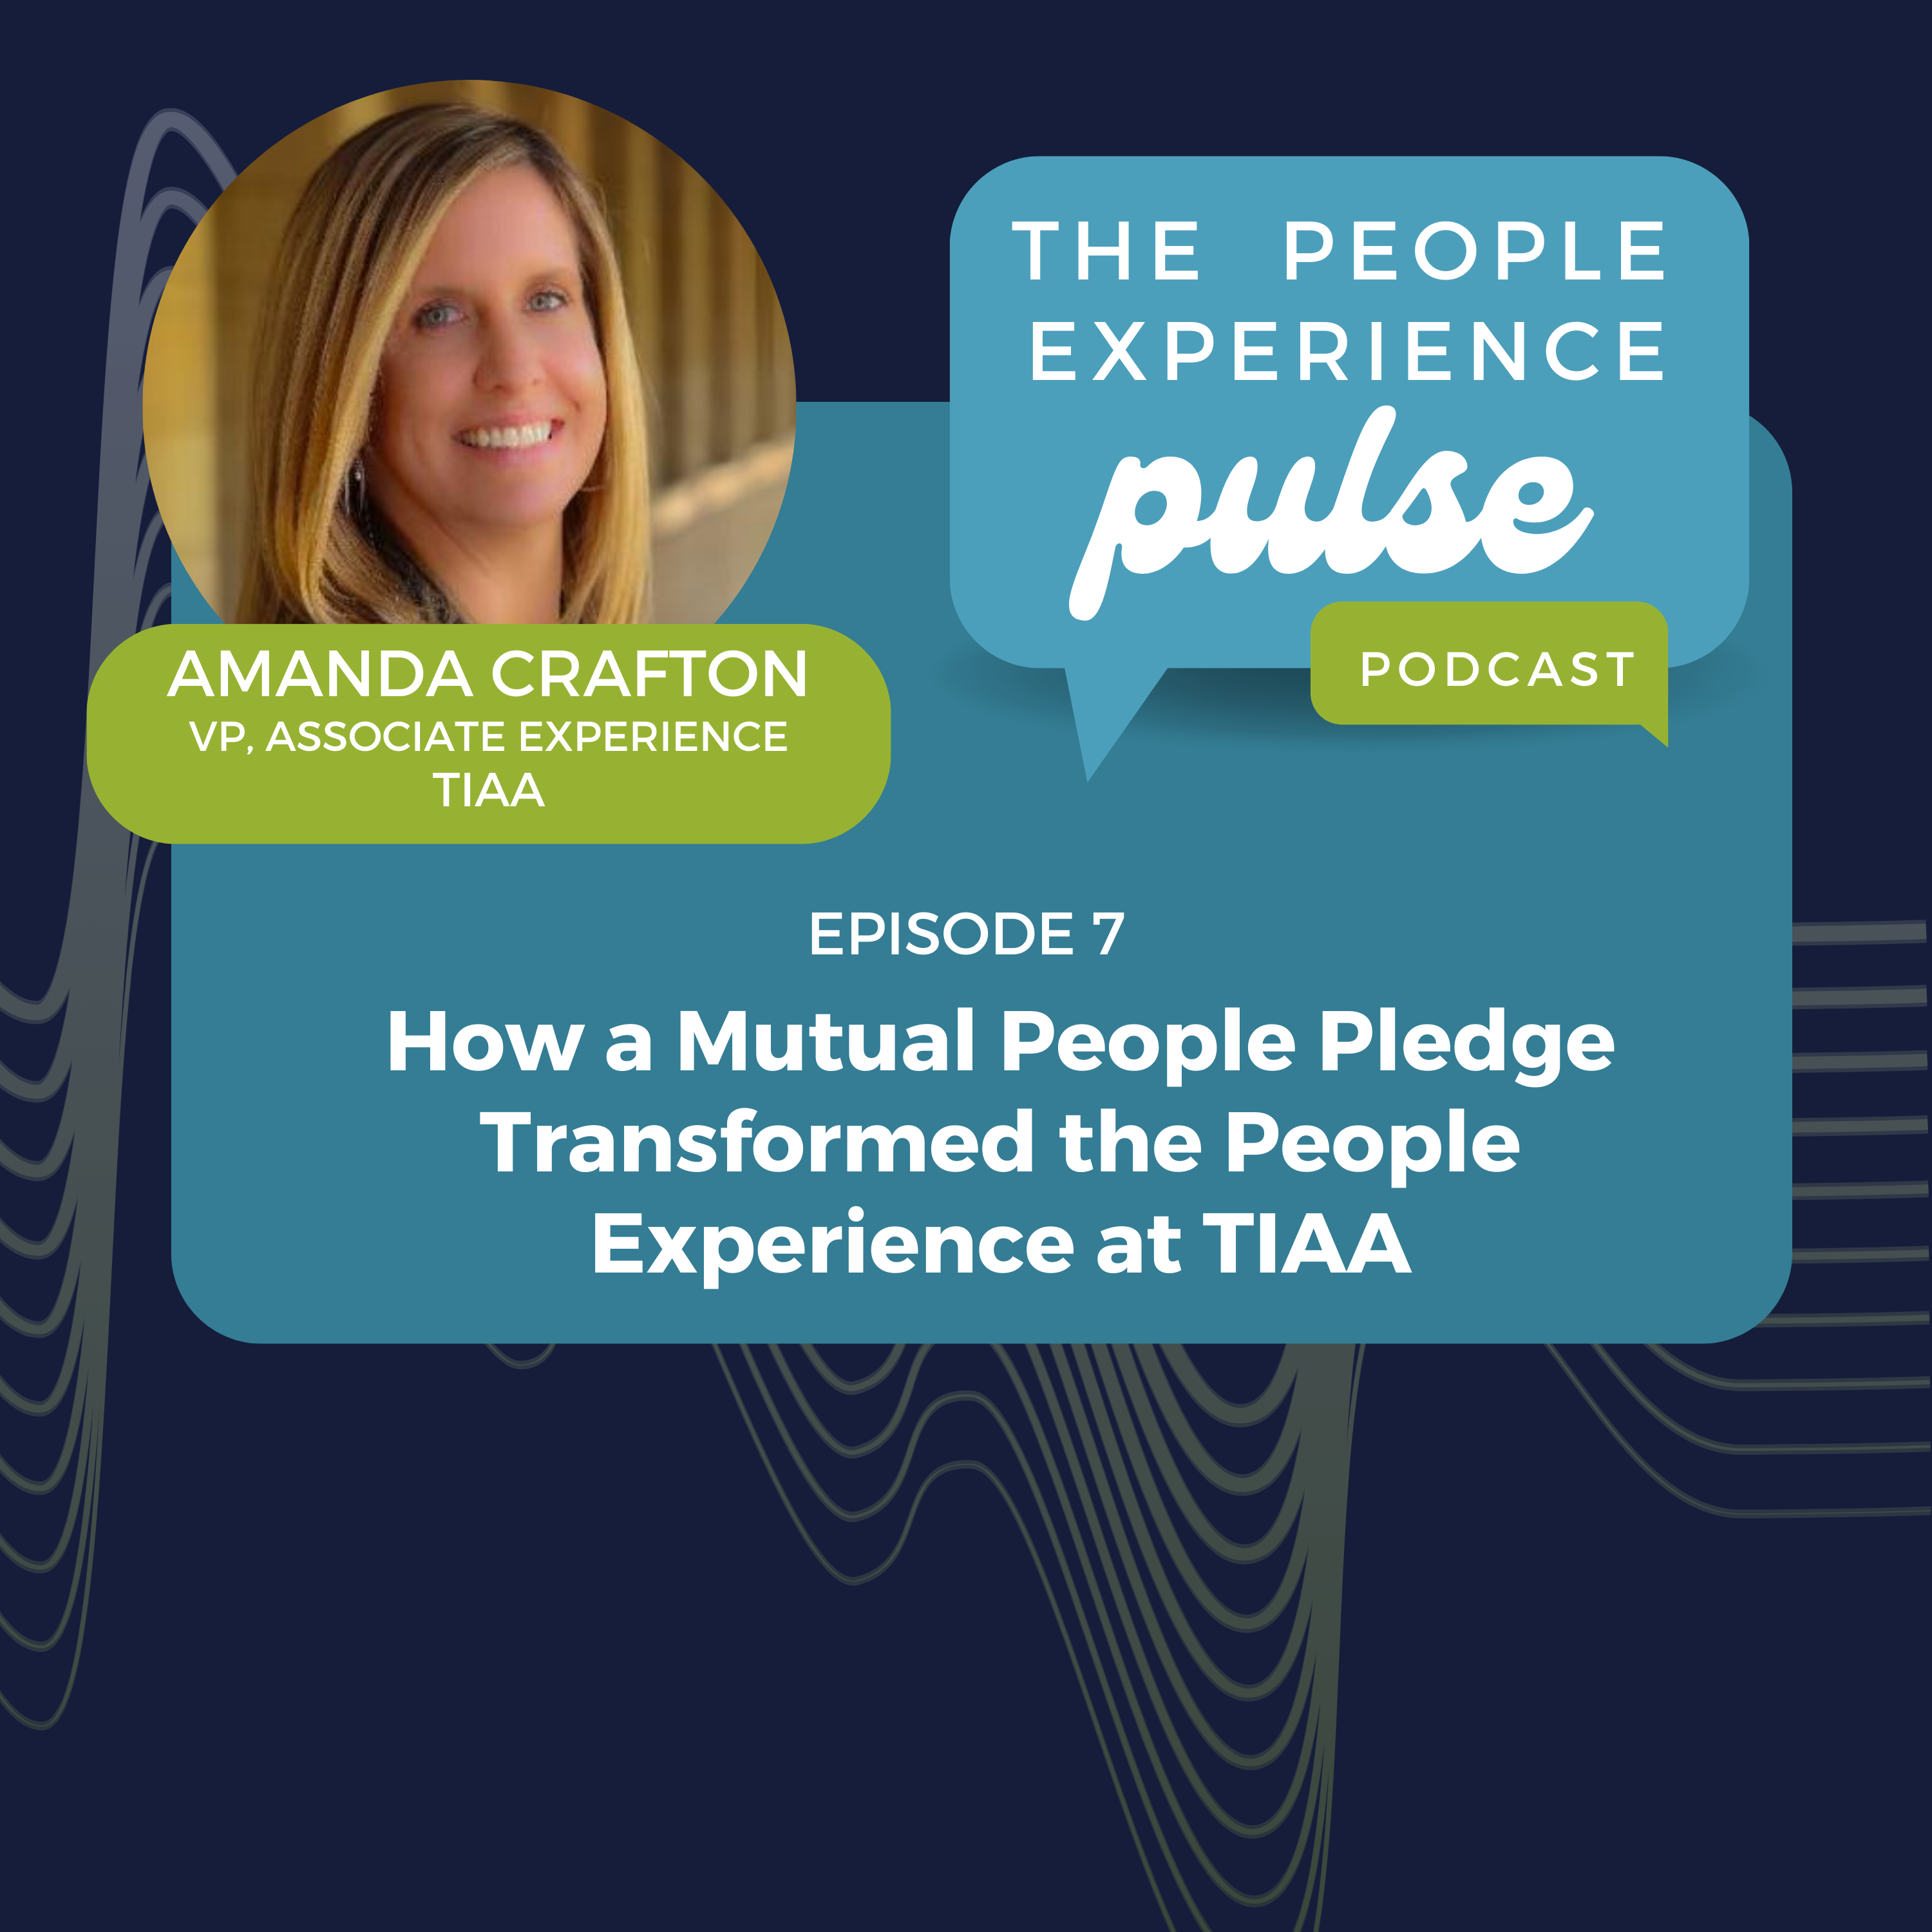 How a Mutual People Pledge Transformed the People Experience at TIAA with Amanda Crafton